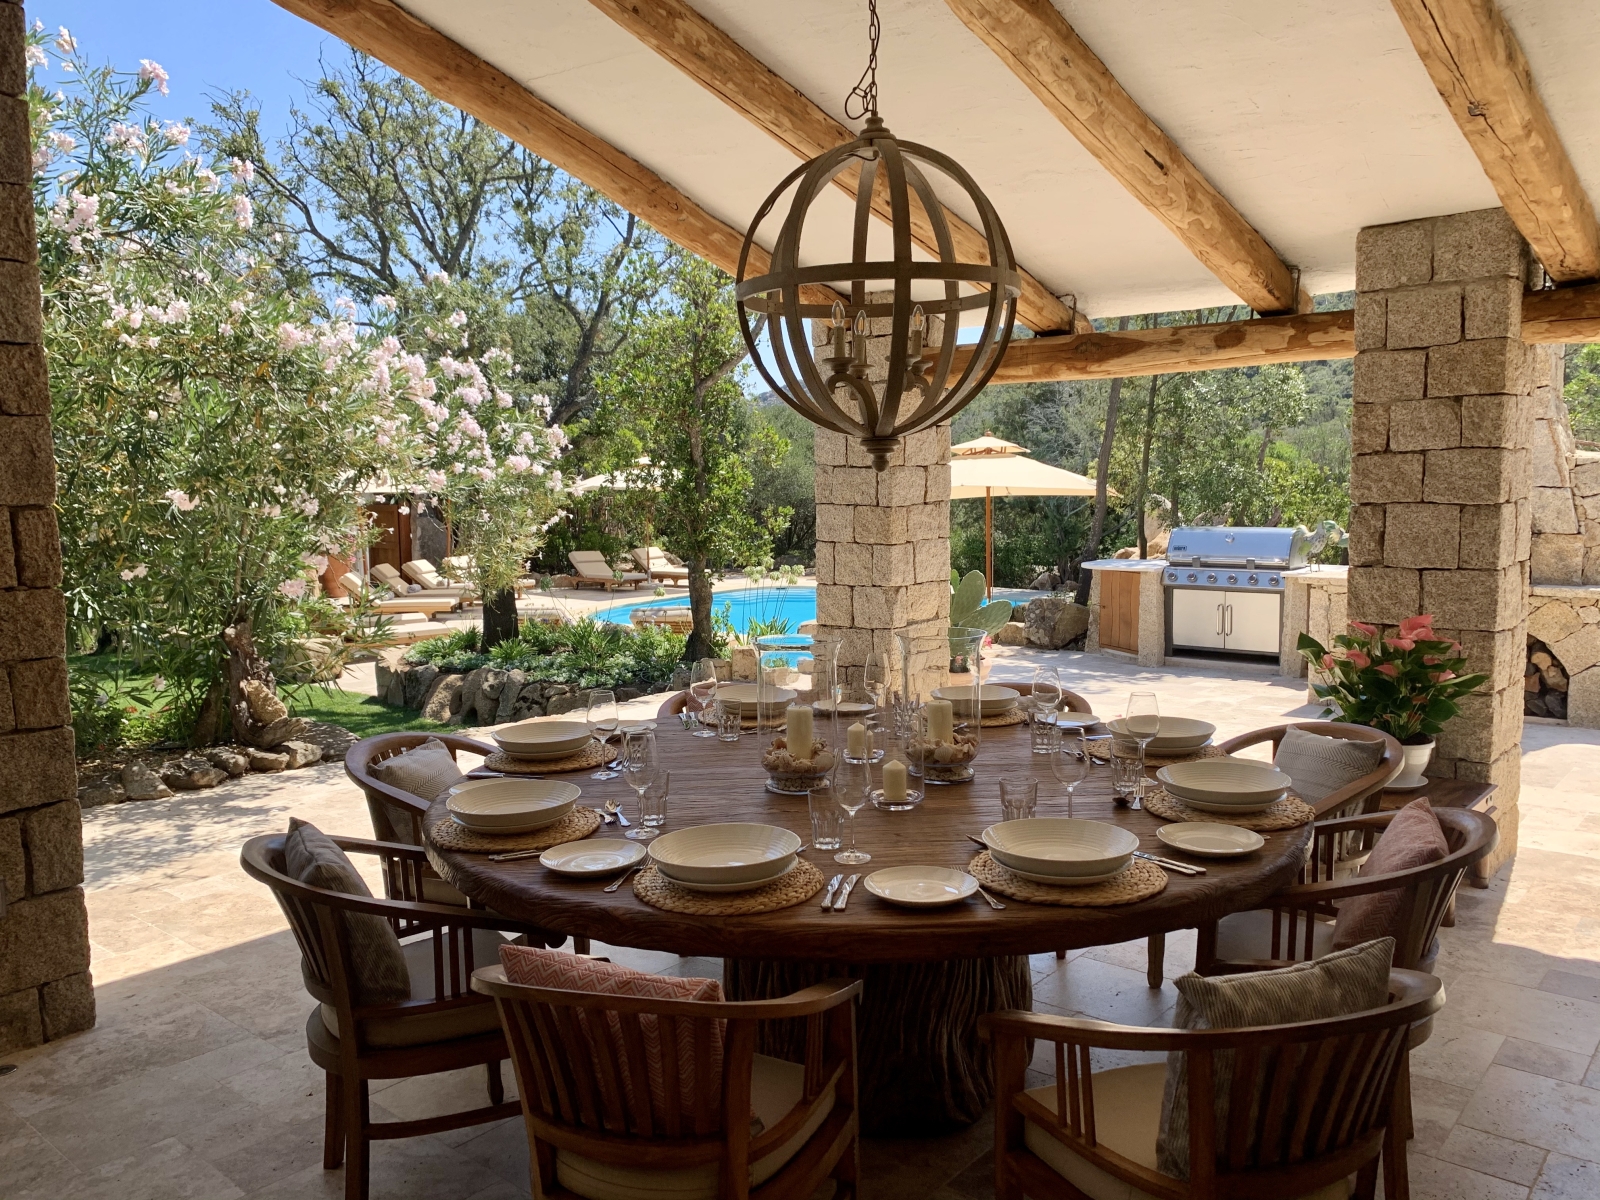 Covered outdoor dining area with table, chairs, hanging light, BBQ and view to pool at Villa Pantaleo on Sardinia, Italy